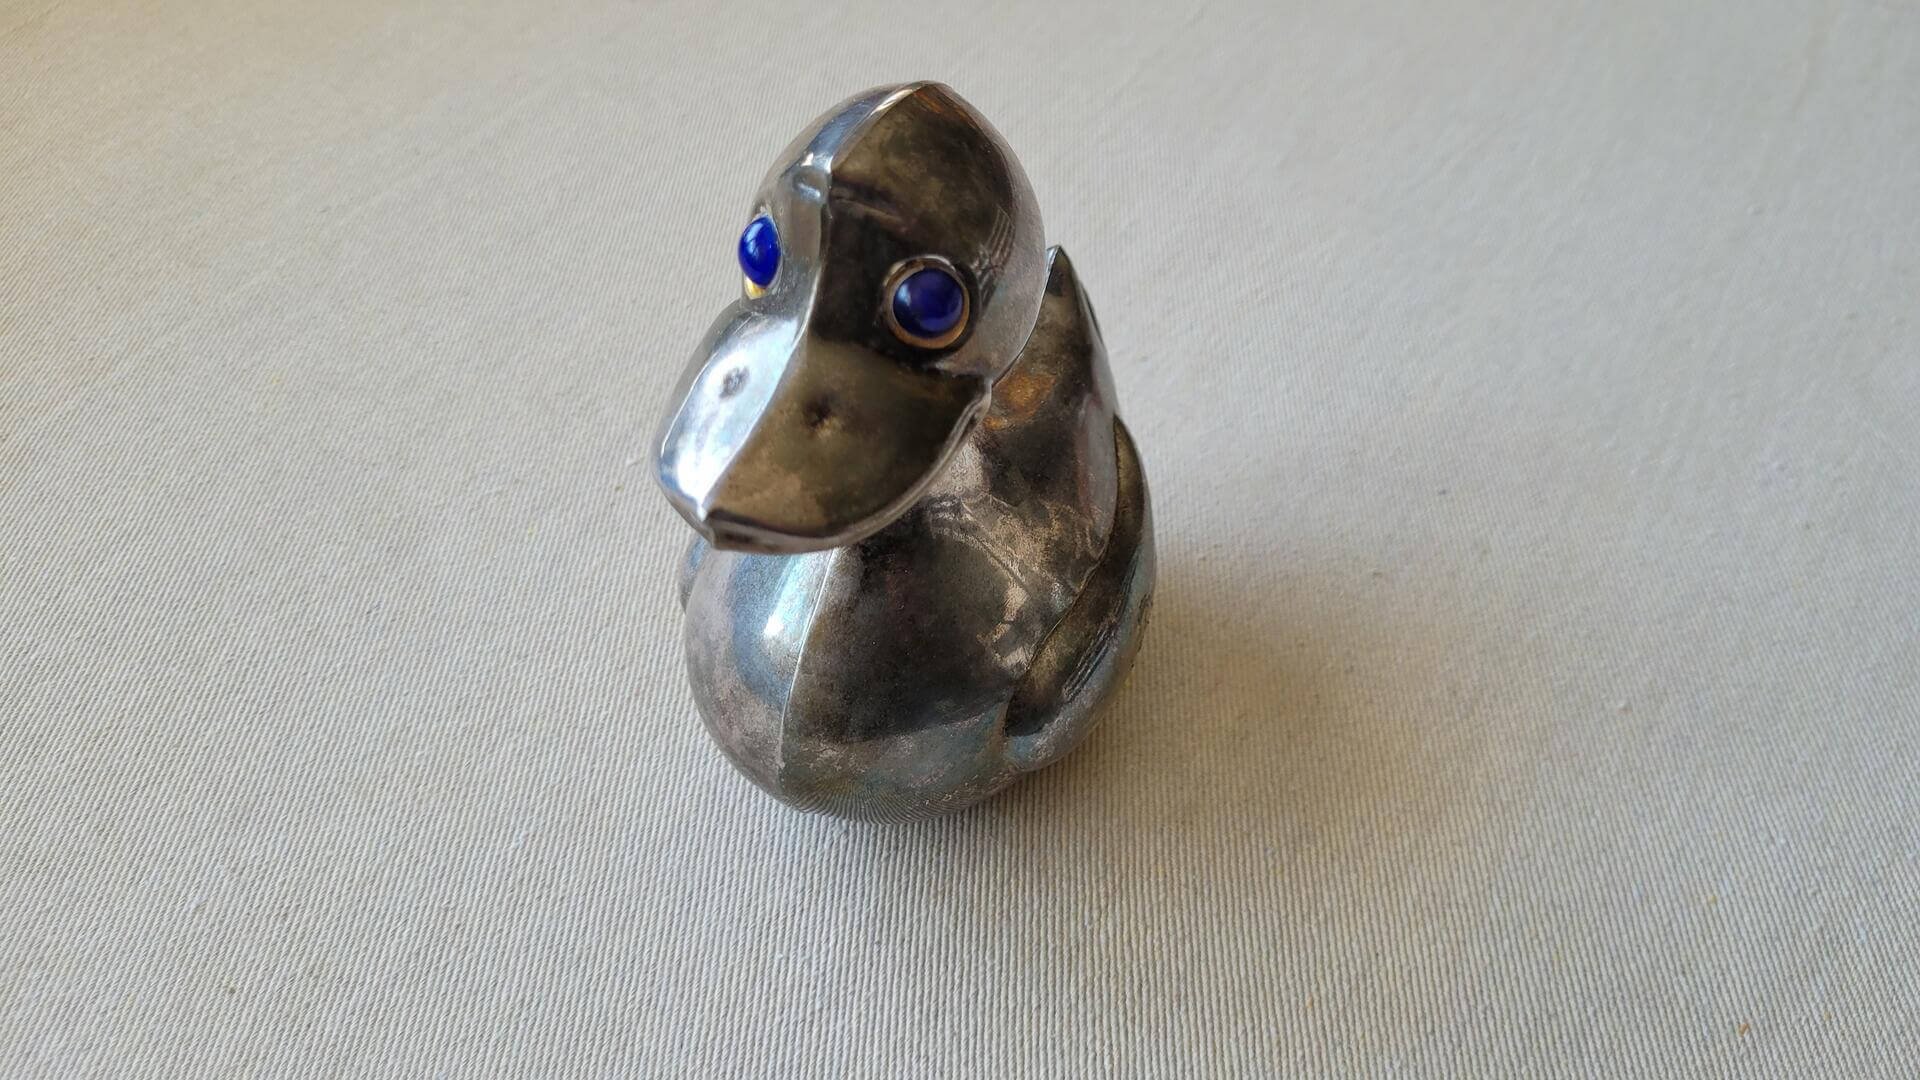 Vintage WM. A. Rogers duck coin bank with blue rhinestone eyes without the key. Retro made in Italy collectible piggy bank, registers & vending memorabilia